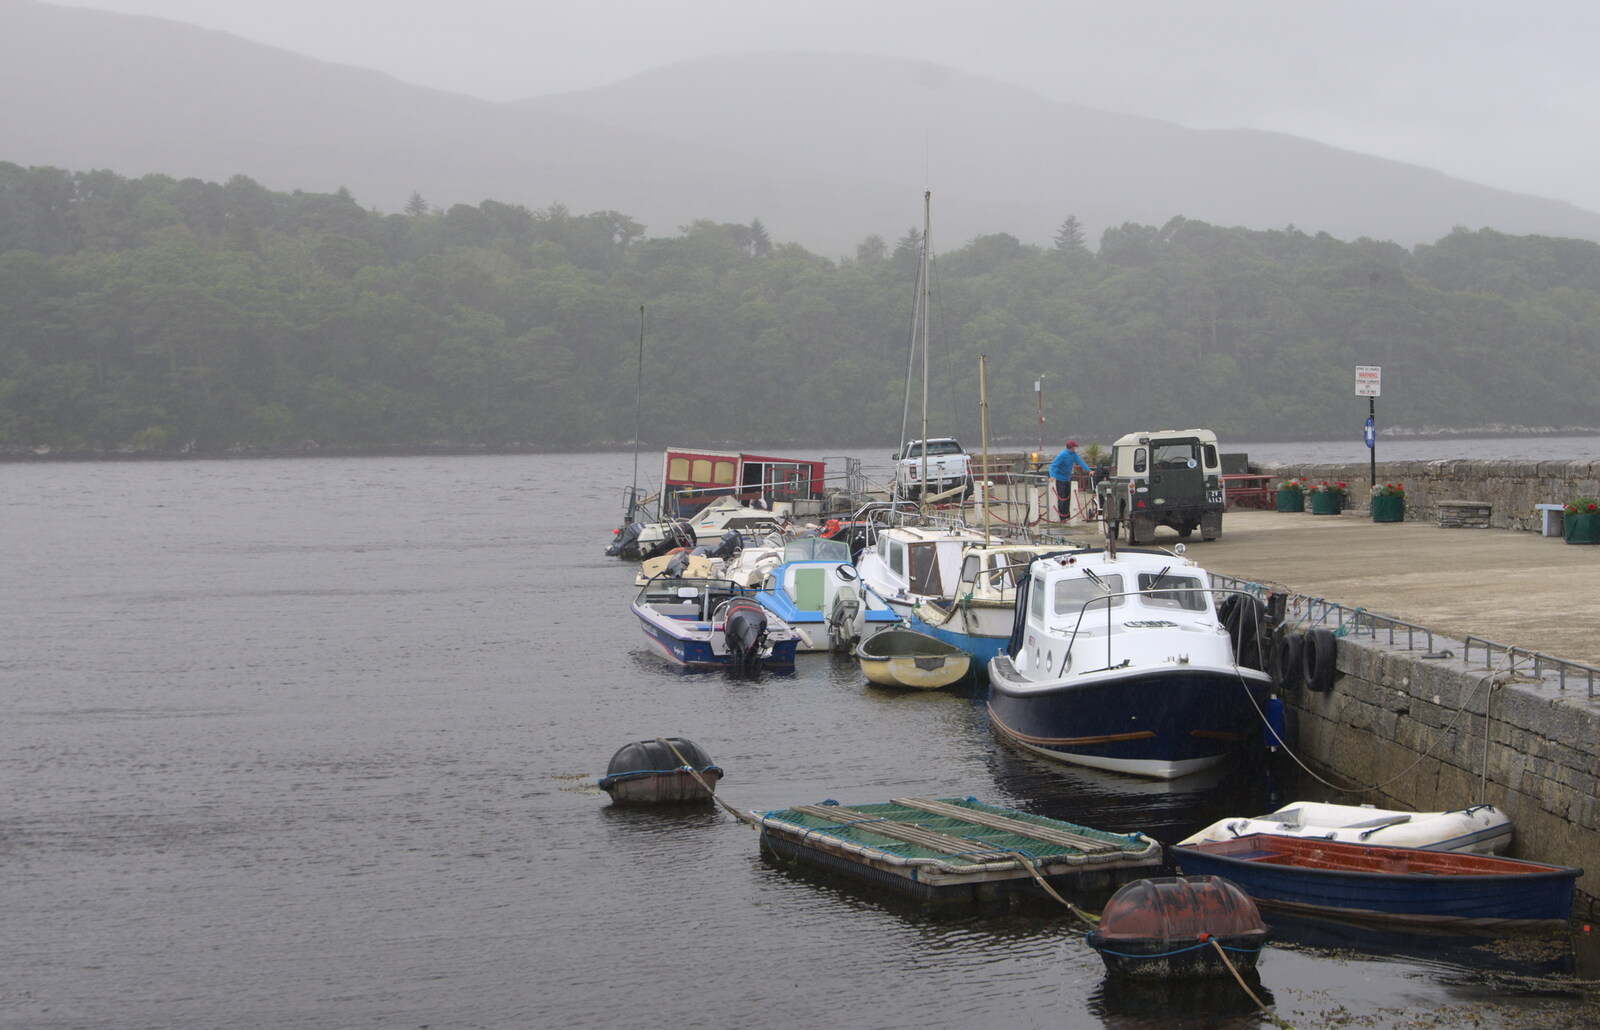 Kenmare harbour in the mist from A Seafari Boat Trip, Kenmare, Kerry, Ireland - 3rd August 2017